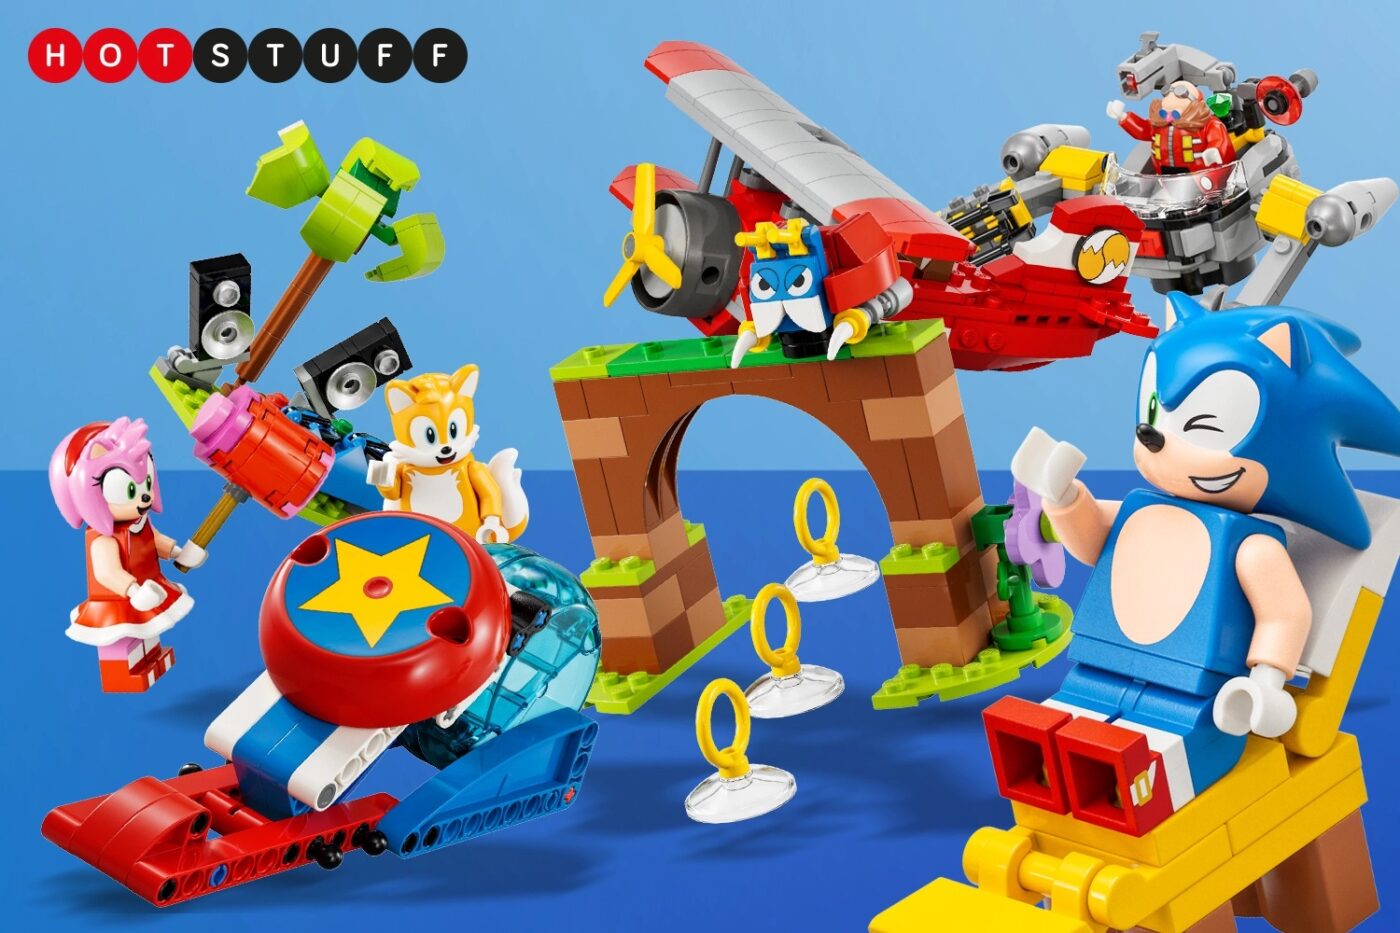 Lego Reveals New Sonic the Hedgehog Sets for Summer 2023